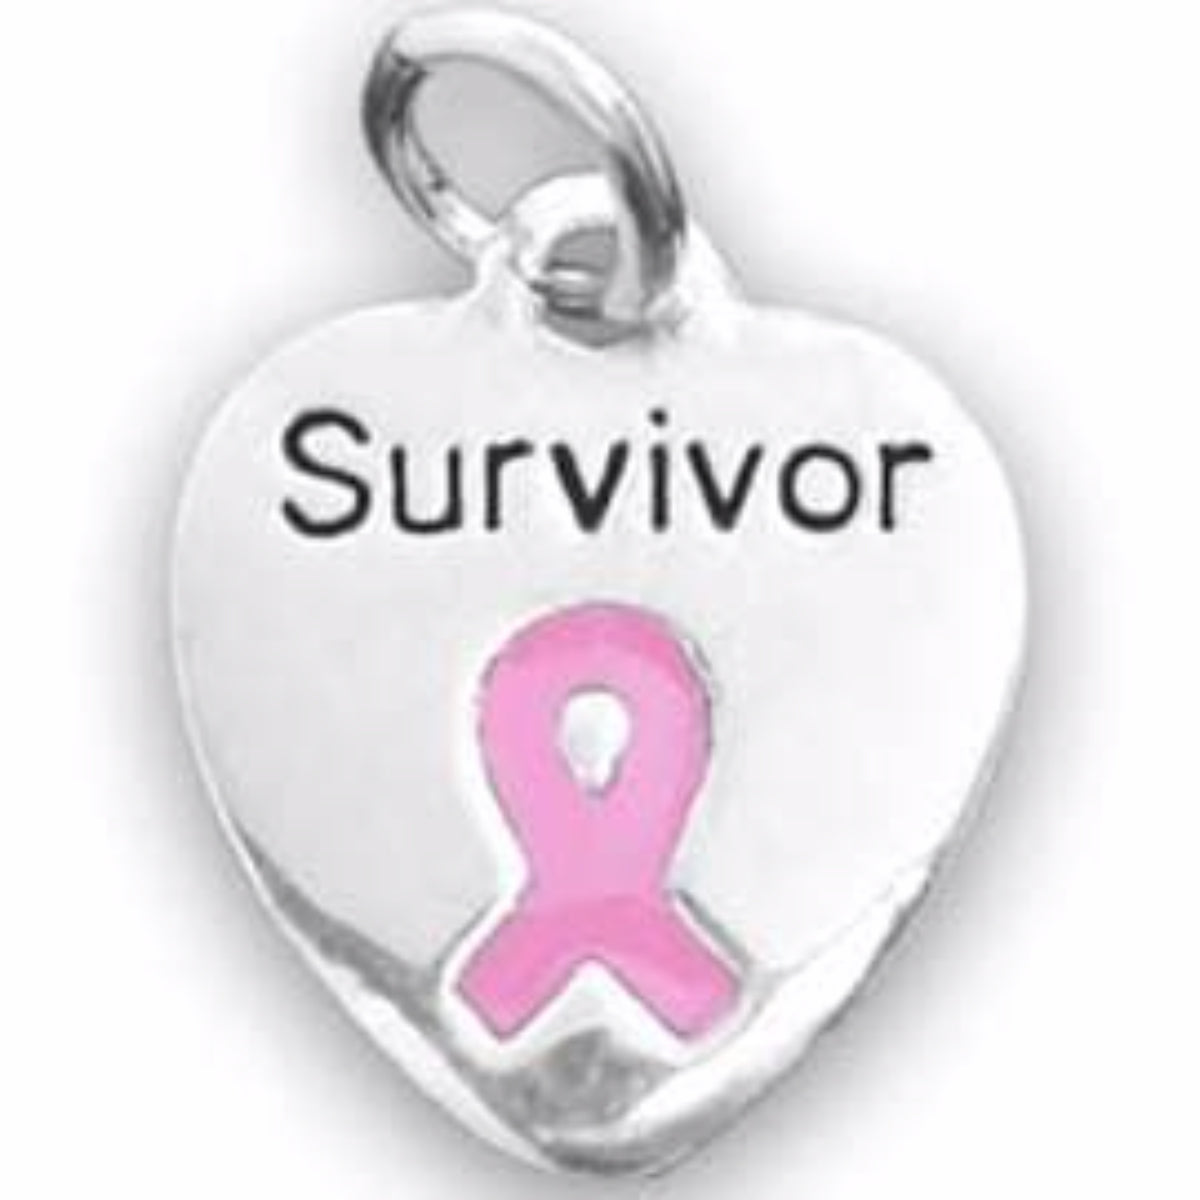 Breast Cancer Awareness Heart Survivor Charm Necklace - The House of Awareness